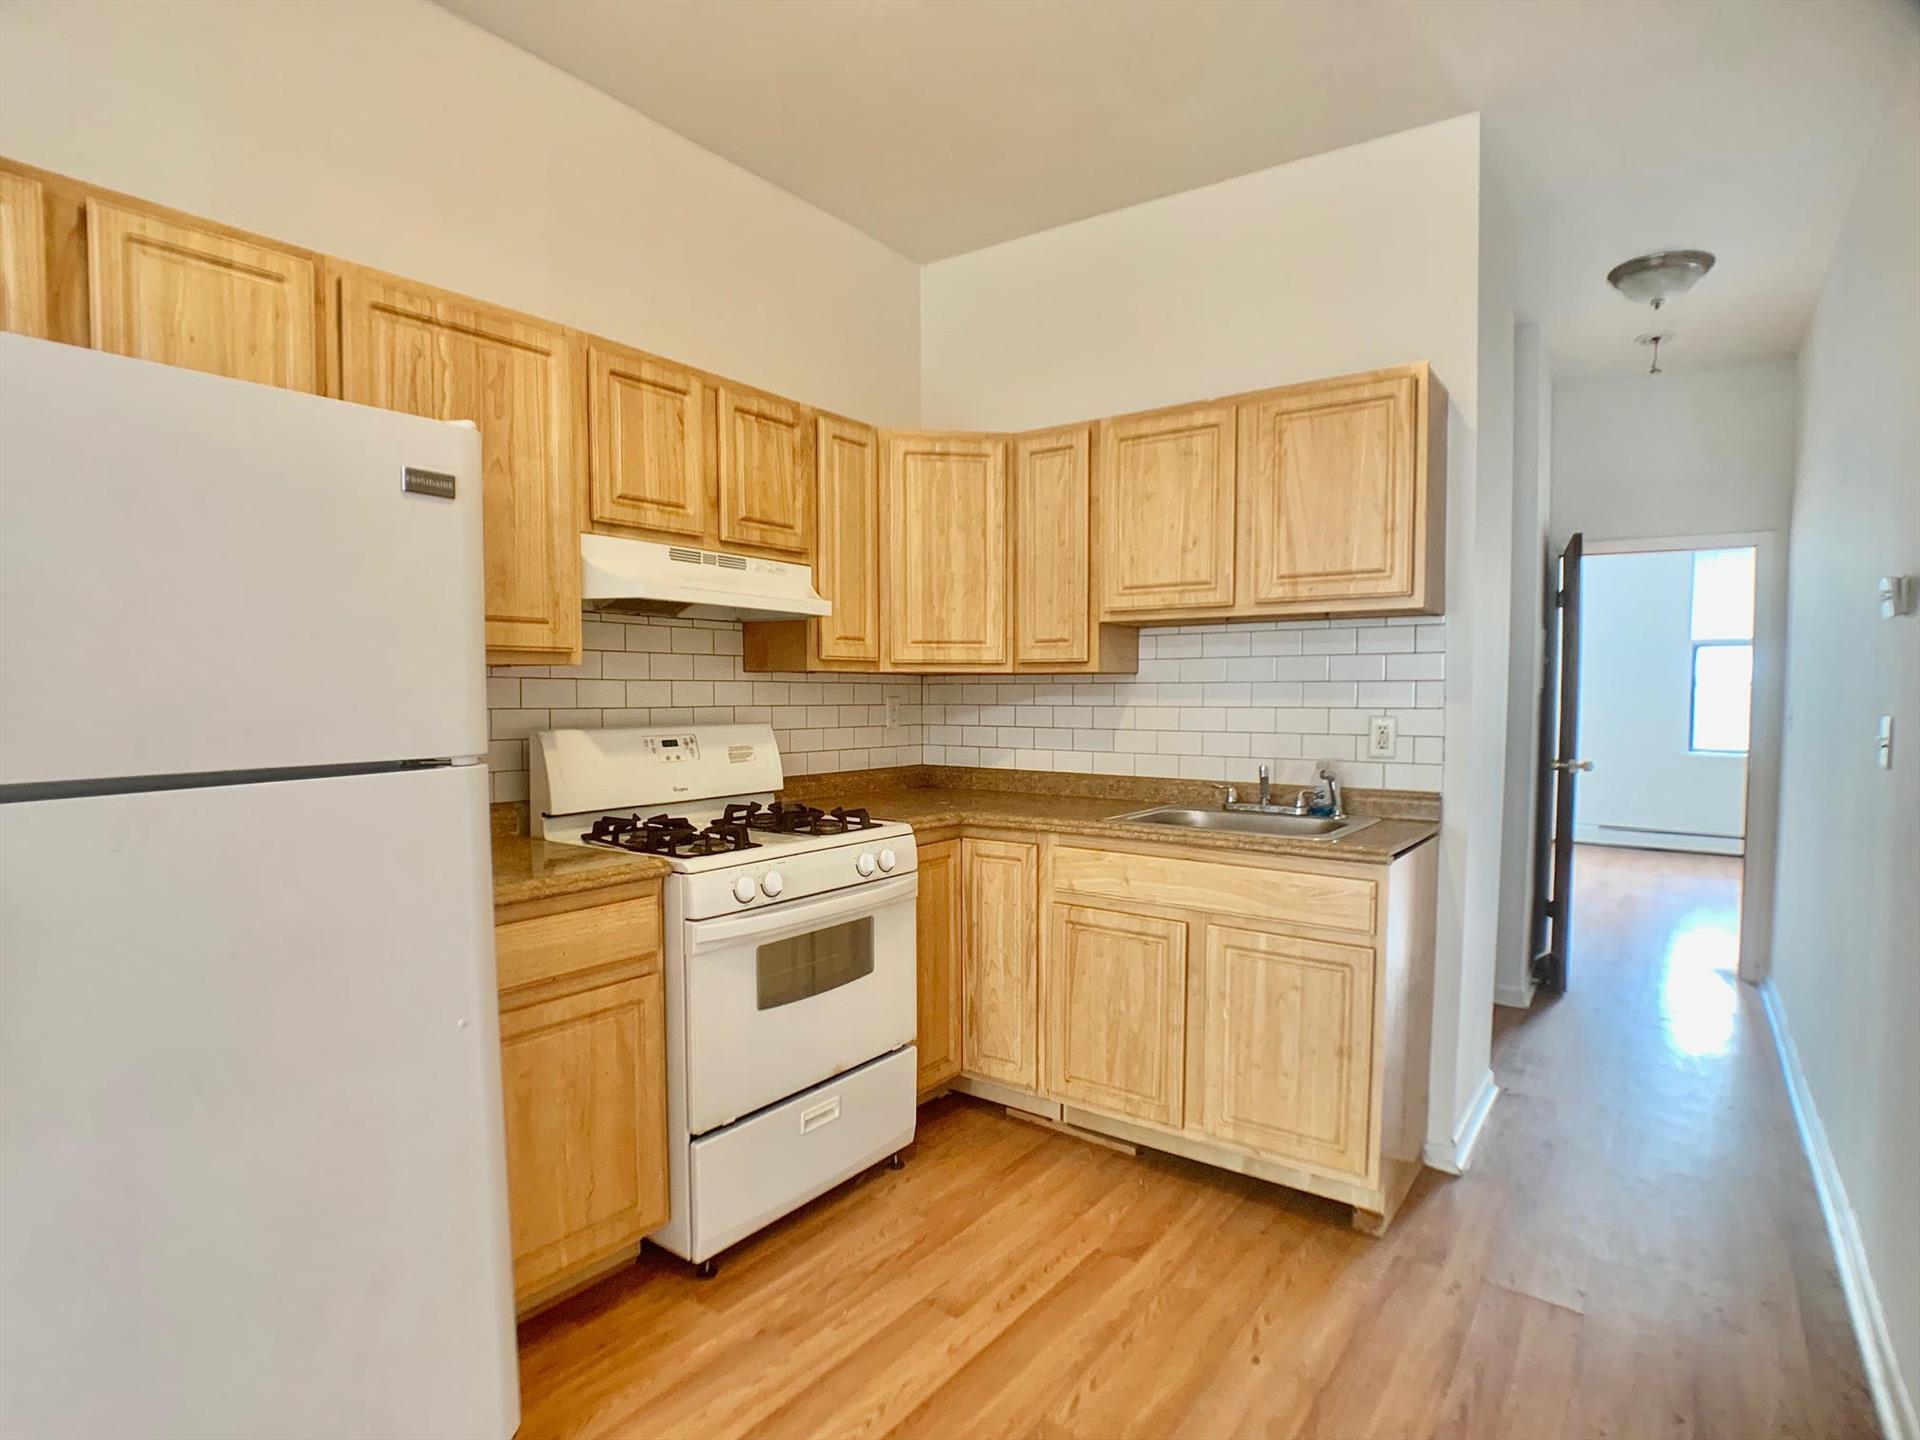 Great 2 bedroom apartment located in the heart of Hoboken. Close to restaurants, shops, bus to NYC & Parks. Please note 1 bedroom is smaller than the other.. good for a home office. Tenant pays broker fee. 